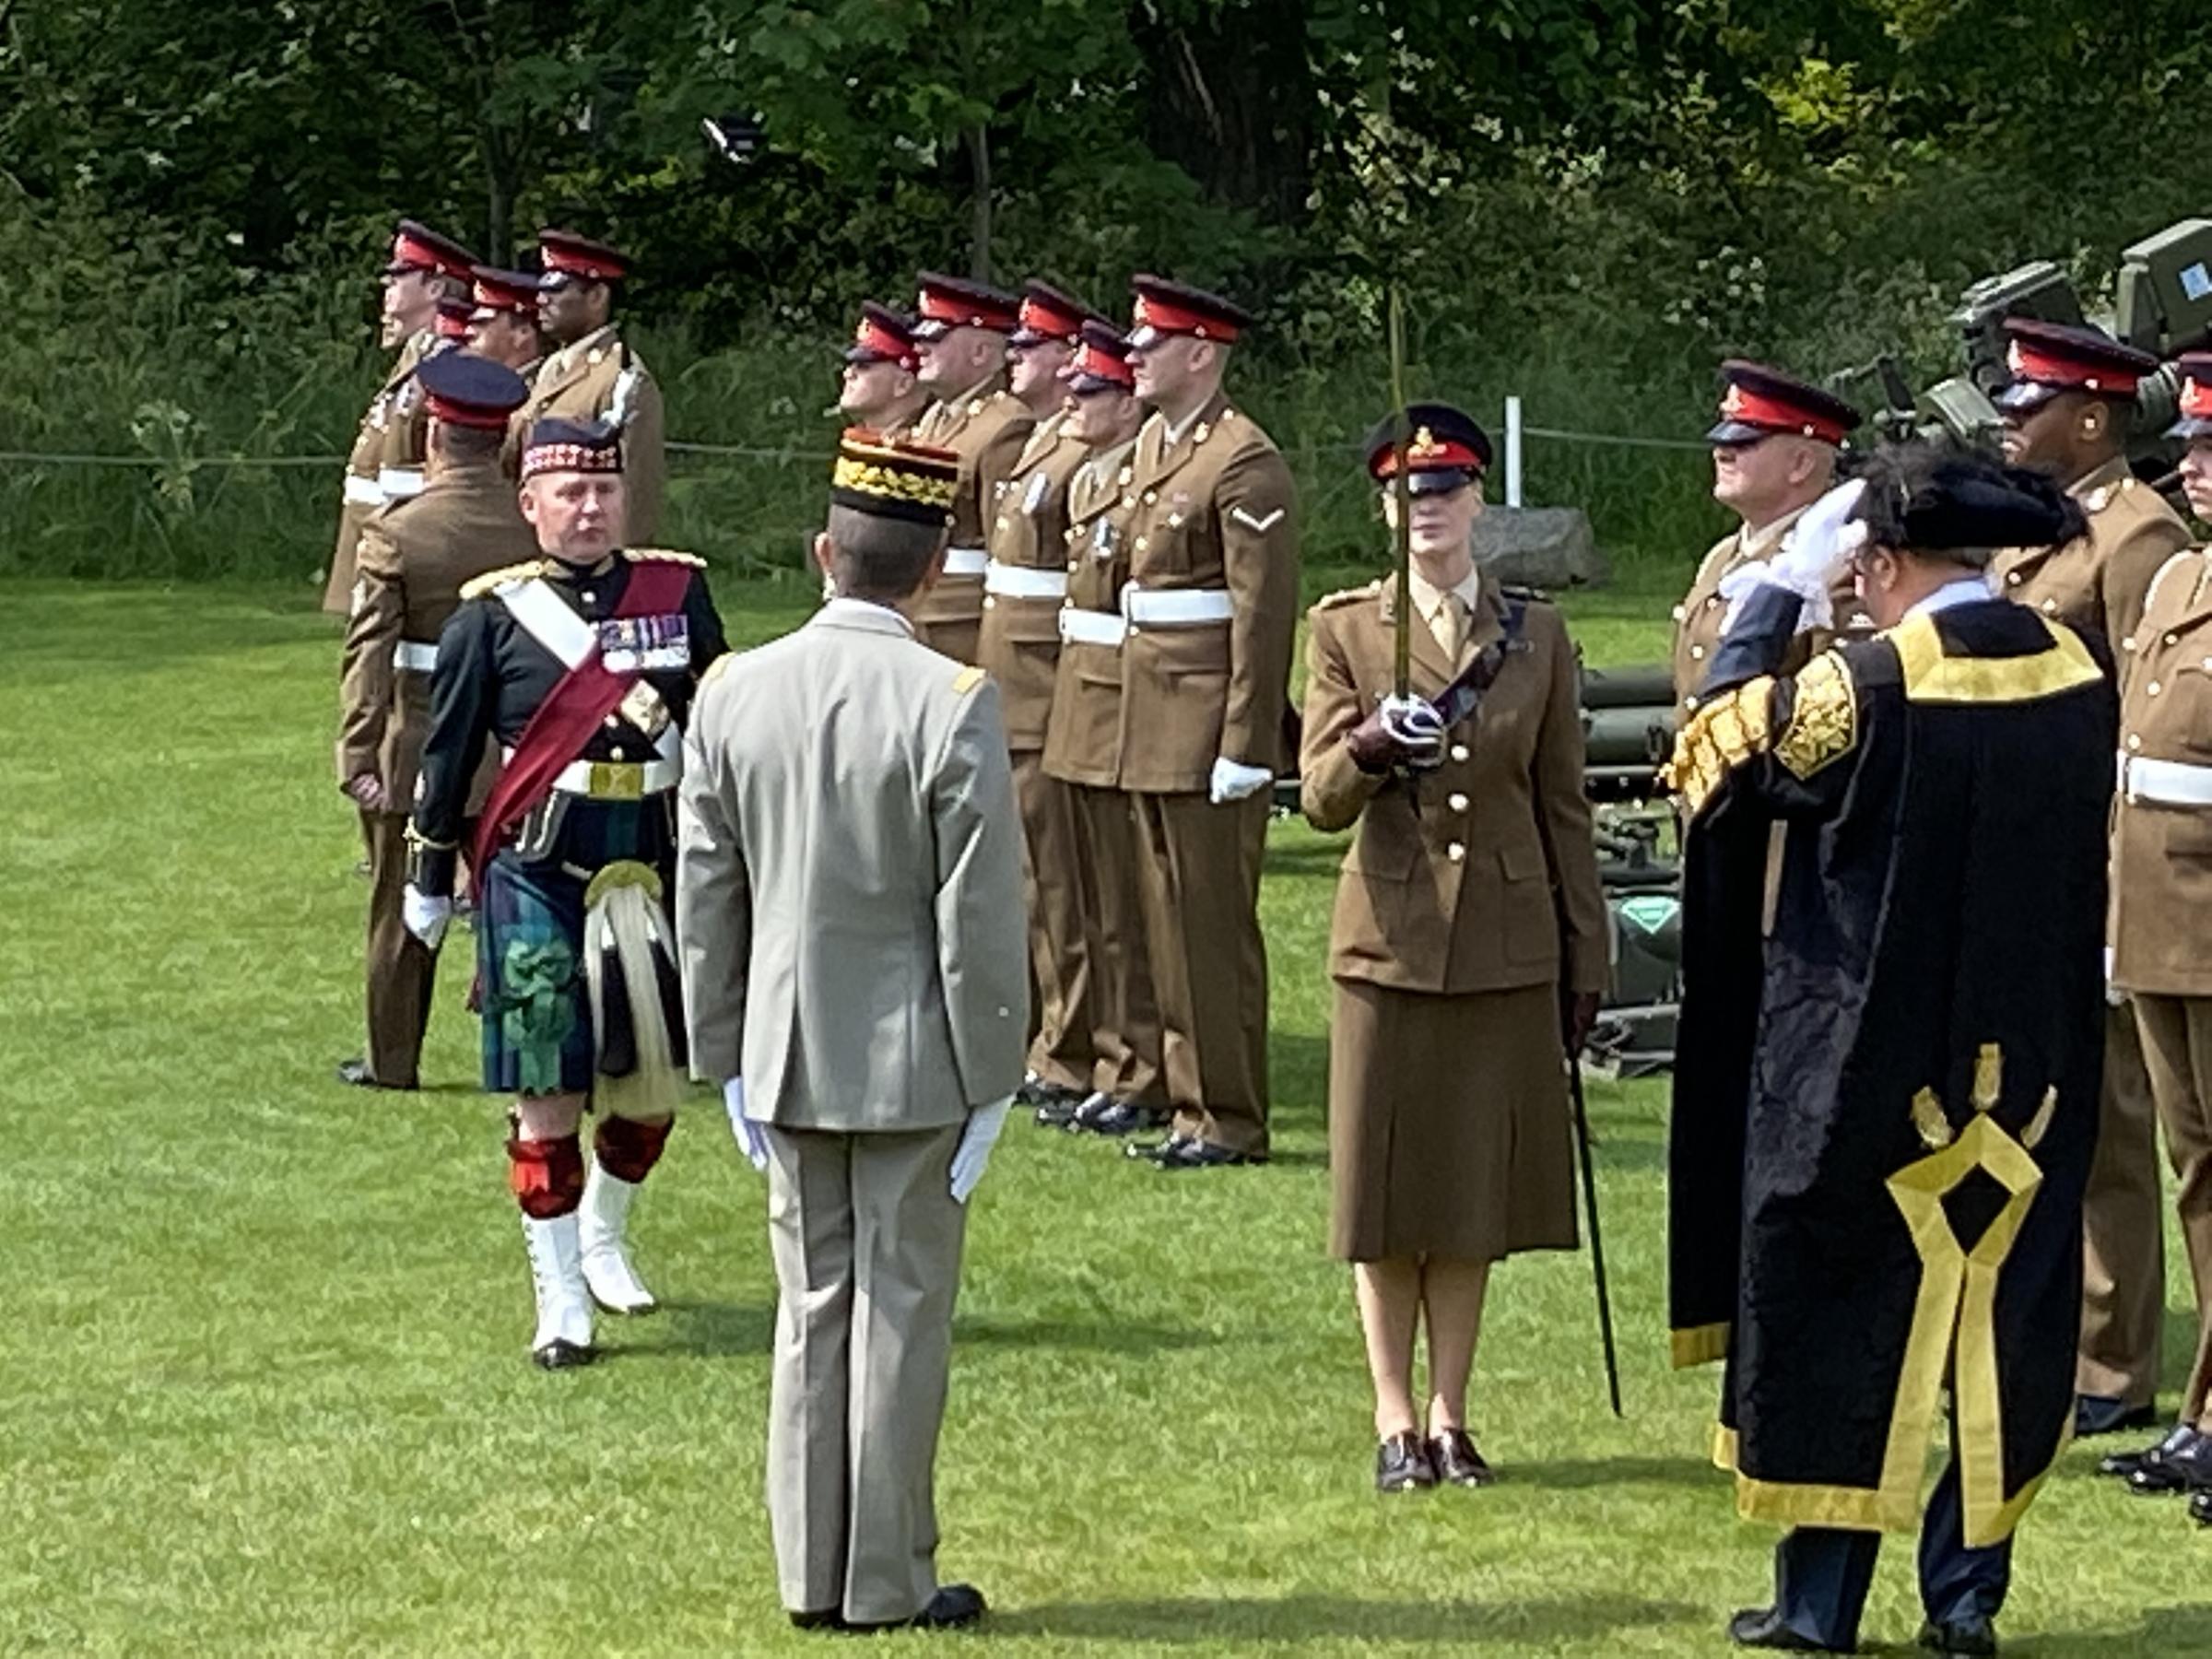 The Lord Mayor of York, Cllr David Carr inspects the troops at the Platinum Jubilee Gun Salute with the Garrison Sergeant of York, WO1 Brian Kiernan in the background in York Museum Gardens. Pic by Megi Rychlikova